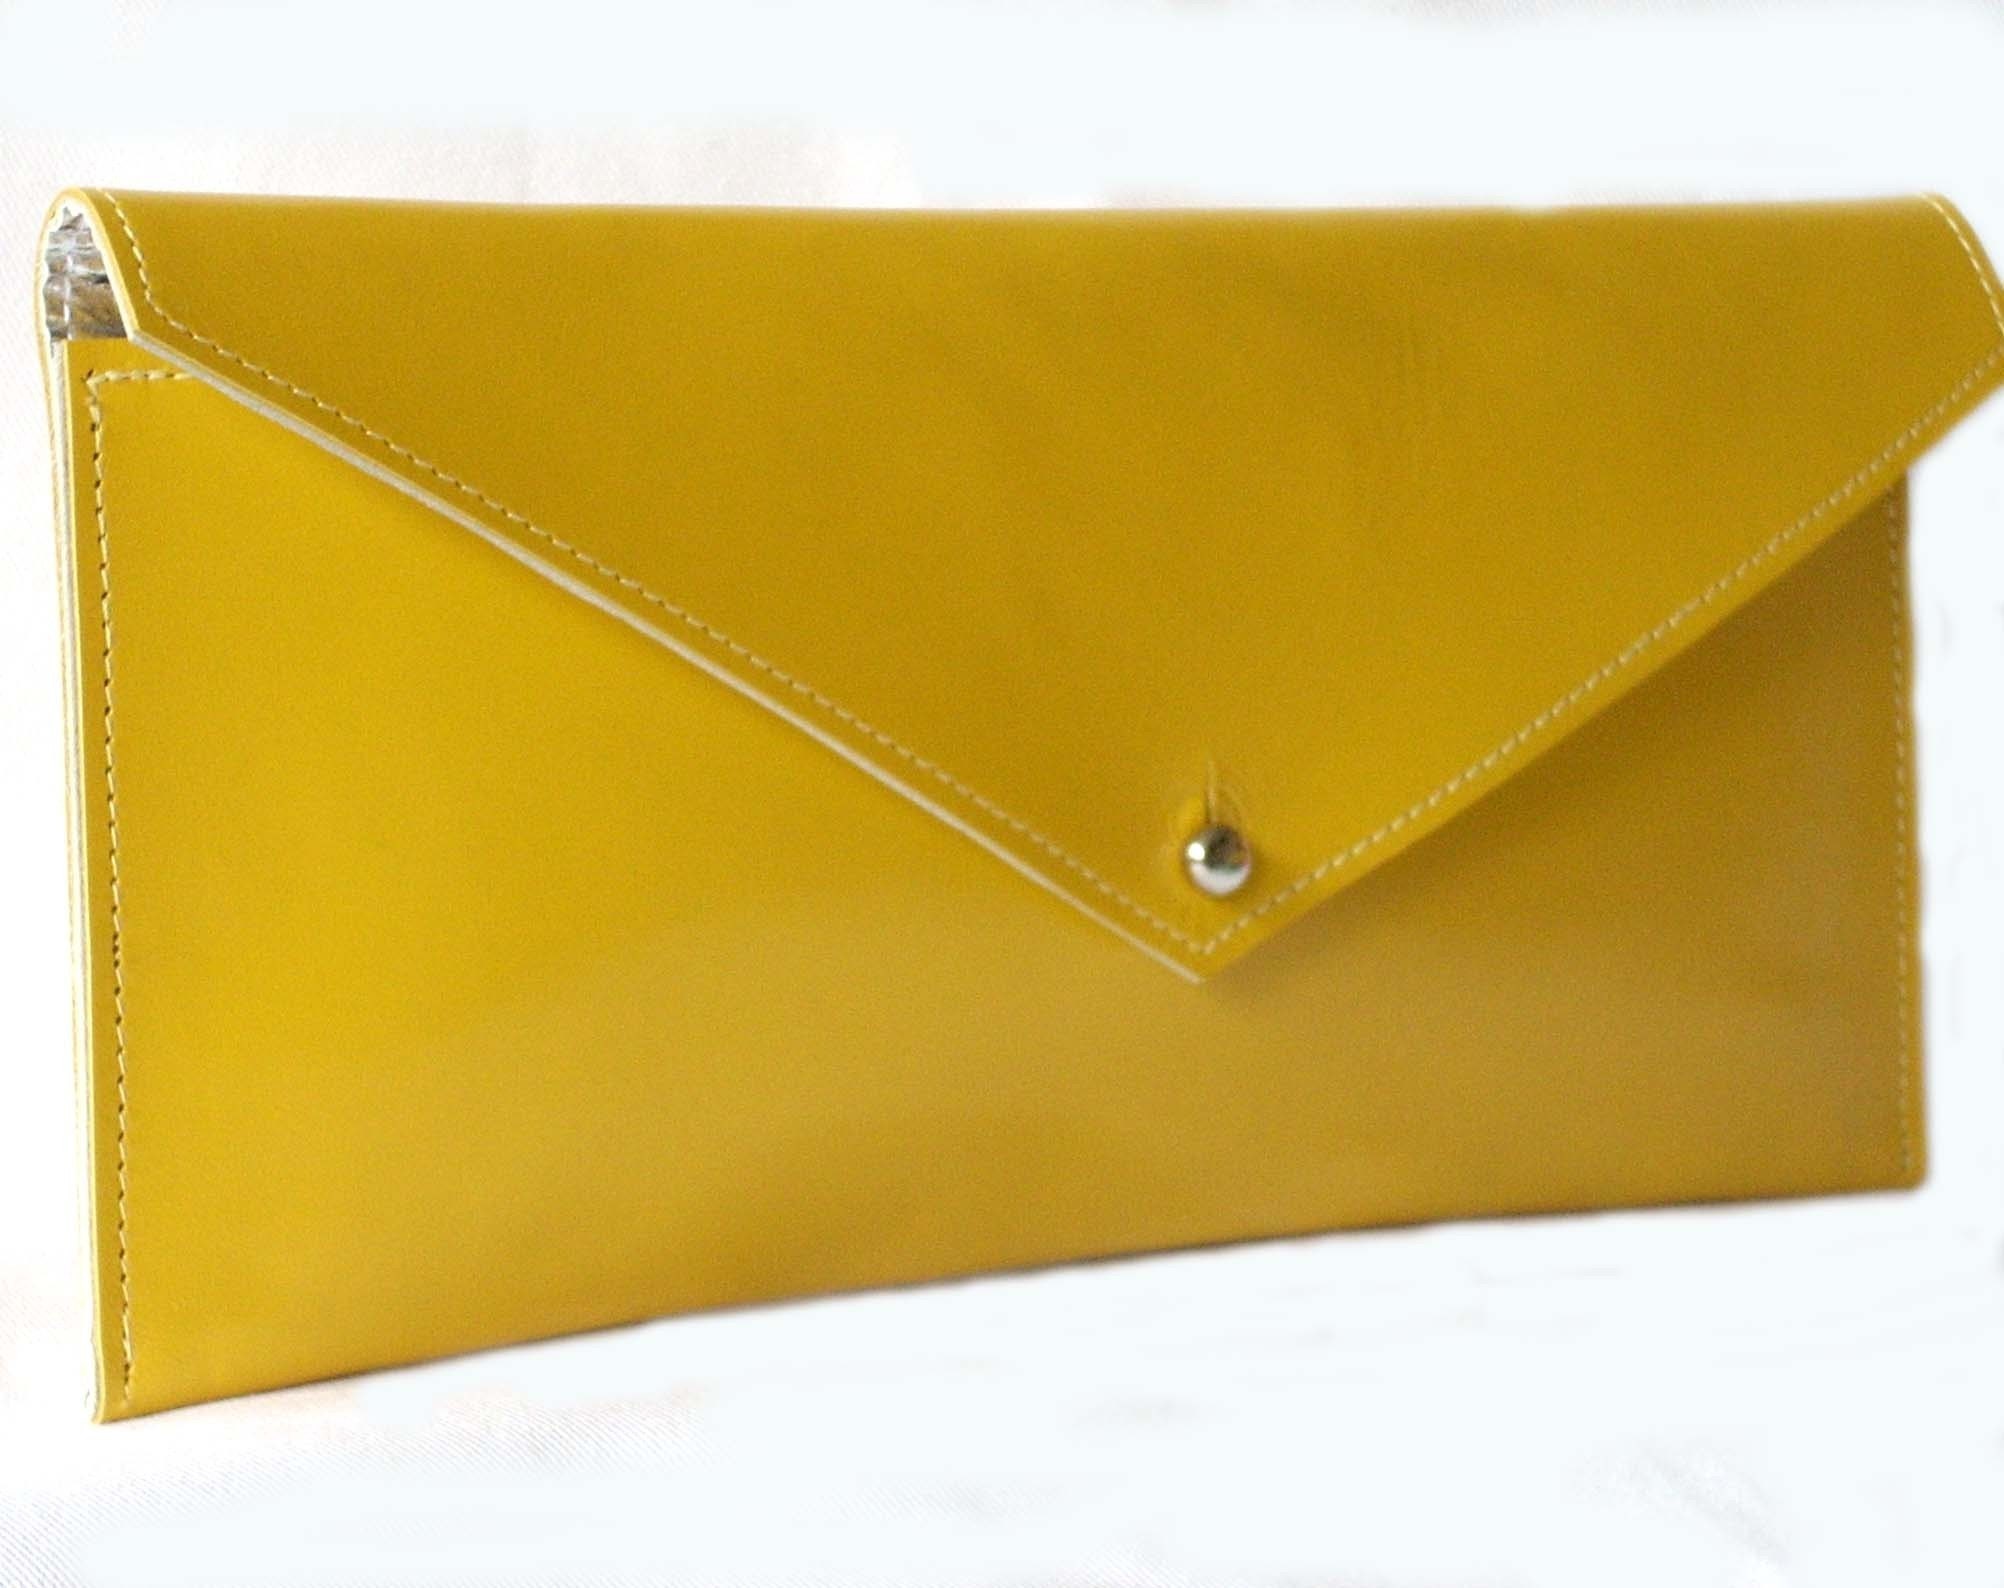 Bold yellow leather clutch - FREE SHIPPING